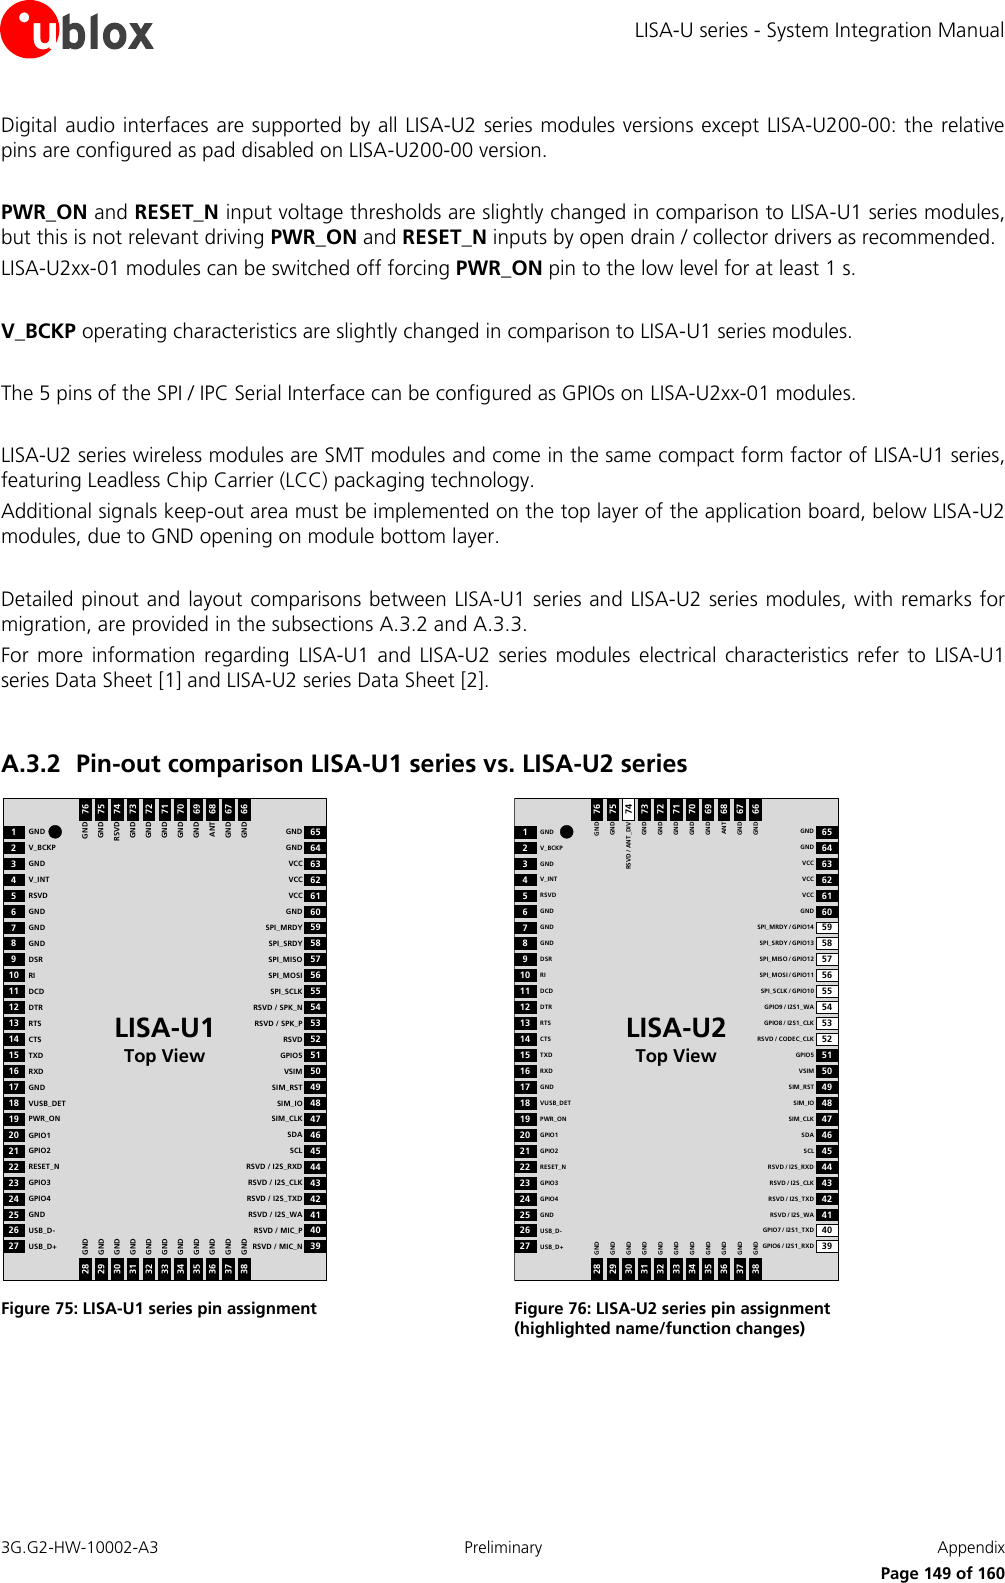 LISA-U series - System Integration Manual 3G.G2-HW-10002-A3  Preliminary  Appendix      Page 149 of 160 Digital audio interfaces are supported by all LISA-U2 series modules versions except LISA-U200-00: the relative pins are configured as pad disabled on LISA-U200-00 version.  PWR_ON and RESET_N input voltage thresholds are slightly changed in comparison to LISA-U1 series modules, but this is not relevant driving PWR_ON and RESET_N inputs by open drain / collector drivers as recommended. LISA-U2xx-01 modules can be switched off forcing PWR_ON pin to the low level for at least 1 s.  V_BCKP operating characteristics are slightly changed in comparison to LISA-U1 series modules.  The 5 pins of the SPI / IPC Serial Interface can be configured as GPIOs on LISA-U2xx-01 modules.  LISA-U2 series wireless modules are SMT modules and come in the same compact form factor of LISA-U1 series, featuring Leadless Chip Carrier (LCC) packaging technology. Additional signals keep-out area must be implemented on the top layer of the application board, below LISA-U2 modules, due to GND opening on module bottom layer.  Detailed pinout and layout comparisons between LISA-U1 series and LISA-U2 series modules, with remarks for migration, are provided in the subsections A.3.2 and A.3.3. For  more information  regarding  LISA-U1  and  LISA-U2 series  modules  electrical  characteristics  refer  to  LISA-U1 series Data Sheet [1] and LISA-U2 series Data Sheet [2].  A.3.2 Pin-out comparison LISA-U1 series vs. LISA-U2 series 65646362616059585756555453525150494847464544434241GNDVCCVCCVCCGNDSPI_MRDYSPI_SRDYSPI_MISOSPI_MOSISPI_SCLKRSVD / SPK_NGNDRSVD / SPK_PRSVDGPIO5VSIMSIM_RSTSIM_IOSIM_CLKSDASCLRSVD / I2S_RXDRSVD / I2S_CLKRSVD / I2S_TXDRSVD / I2S_WA12345678910111213141516171819202122232425V_BCKPGNDV_INTRSVDGNDGNDGNDDSRRIDCDDTRGNDRTSCTSTXDRXDGNDVUSB_DETPWR_ONGPIO1GPIO2RESET_NGPIO3GPIO4GND2627USB_D-USB_D+4039RSVD / MIC_PRSVD / MIC_N2829303132333435363738GNDGNDGNDGNDGNDGNDGNDGNDGNDGNDGND 7675747372717069686766GNDRSVDGNDGNDGNDGNDGNDANTGNDGNDGNDLISA-U1Top View Figure 75: LISA-U1 series pin assignment 65646362616059585756555453525150494847464544434241GNDVCCVCCVCCGNDSPI_MRDY / GPIO14SPI_SRDY / GPIO13SPI_MISO / GPIO12SPI_MOSI / GPIO11SPI_SCLK / GPIO10GPIO9 / I2S1_WAGNDGPIO8 / I2S1_CLKRSVD / CODEC_CLKGPIO5VSIMSIM_RSTSIM_IOSIM_CLKSDASCLRSVD / I2S_RXDRSVD / I2S_CLKRSVD / I2S_TXDRSVD / I2S_WA12345678910111213141516171819202122232425V_BCKPGNDV_INTRSVDGNDGNDGNDDSRRIDCDDTRGNDRTSCTSTXDRXDGNDVUSB_DETPWR_ONGPIO1GPIO2RESET_NGPIO3GPIO4GND2627USB_D-USB_D+4039GPIO7 / I2S1_TXDGPIO6 / I2S1_RXD2829303132333435363738GNDGNDGNDGNDGNDGNDGNDGNDGNDGNDGND 7675747372717069686766GNDRSVD / ANT_DIVGNDGNDGNDGNDGNDANTGNDGNDGNDLISA-U2Top View Figure 76: LISA-U2 series pin assignment  (highlighted name/function changes)  